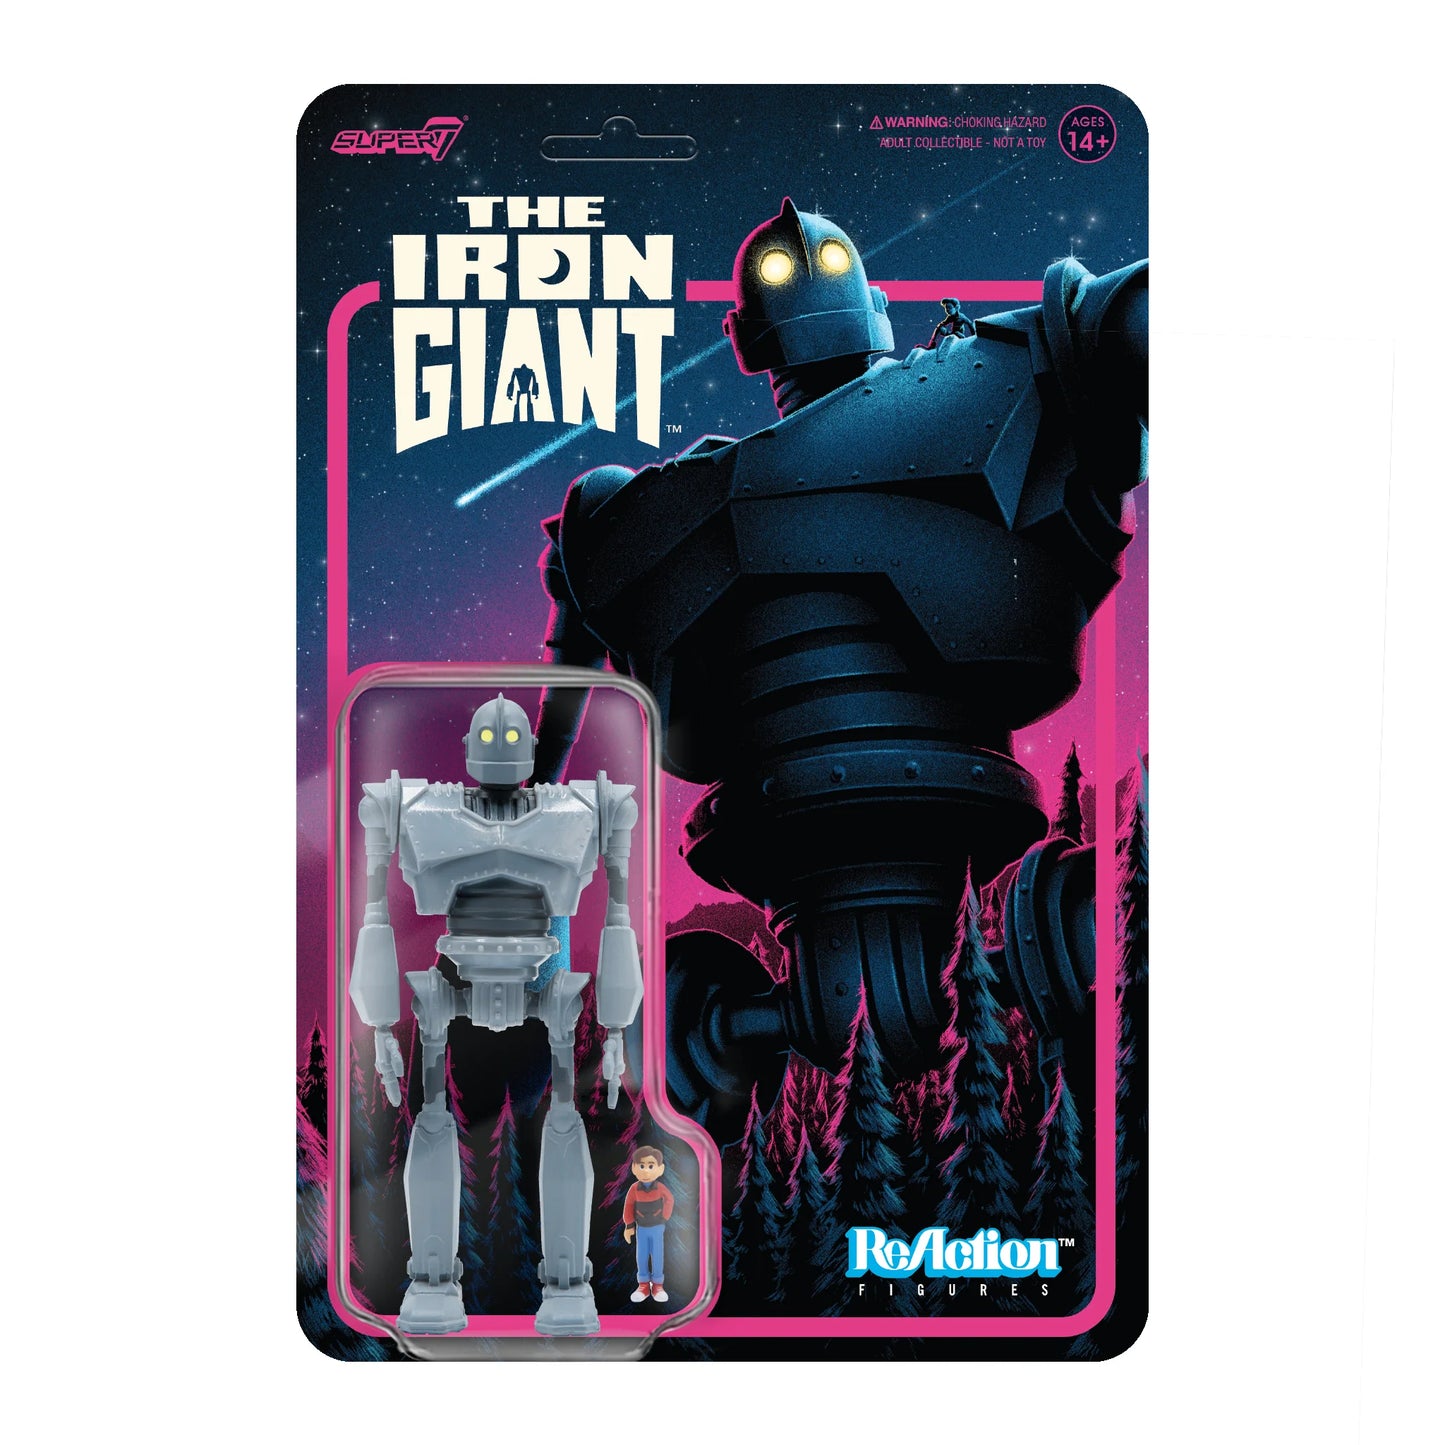 THE IRON GIANT REACTION FIGURE - THE IRON GIANT (WITH HOGARTH HUGHES)